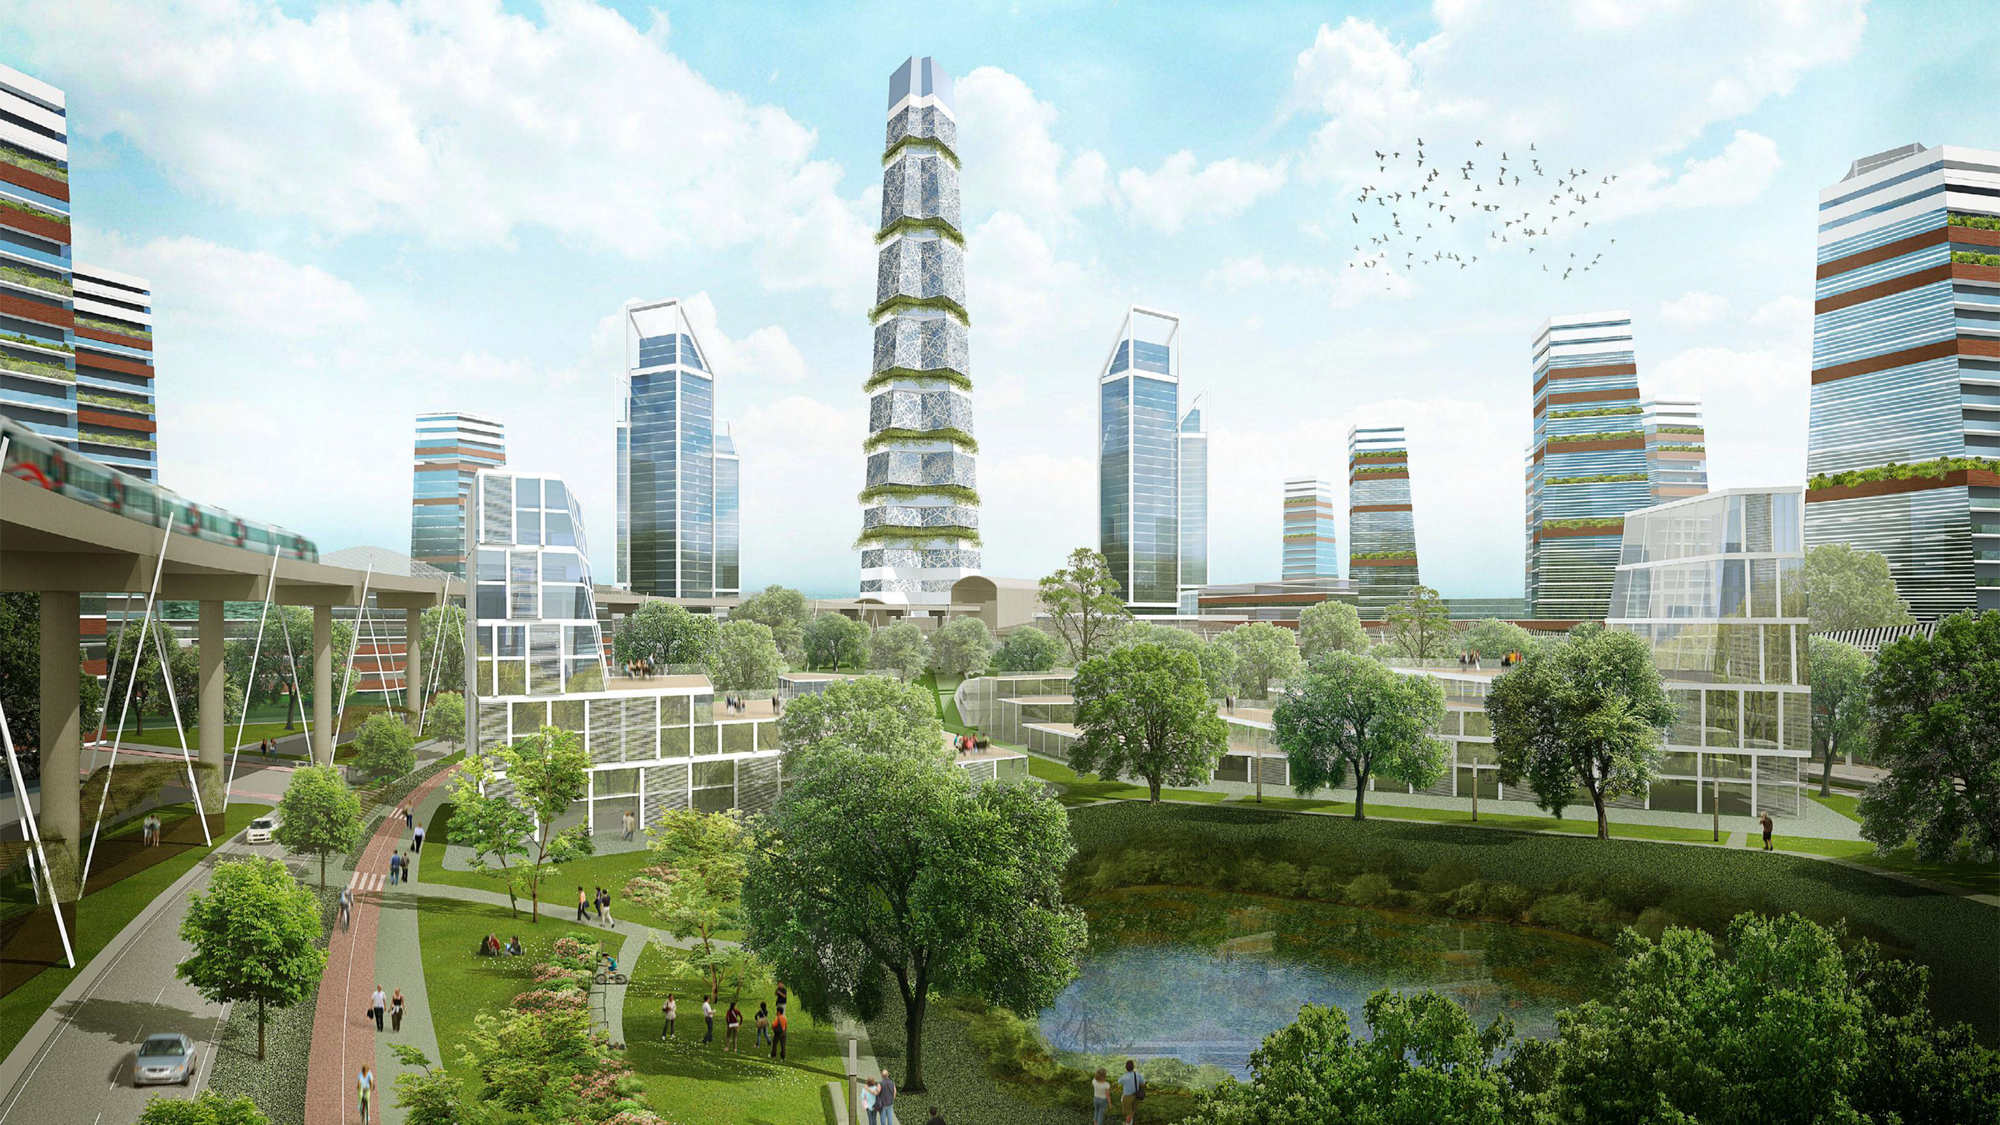 High Rise Developments to Open Up Space in Cities